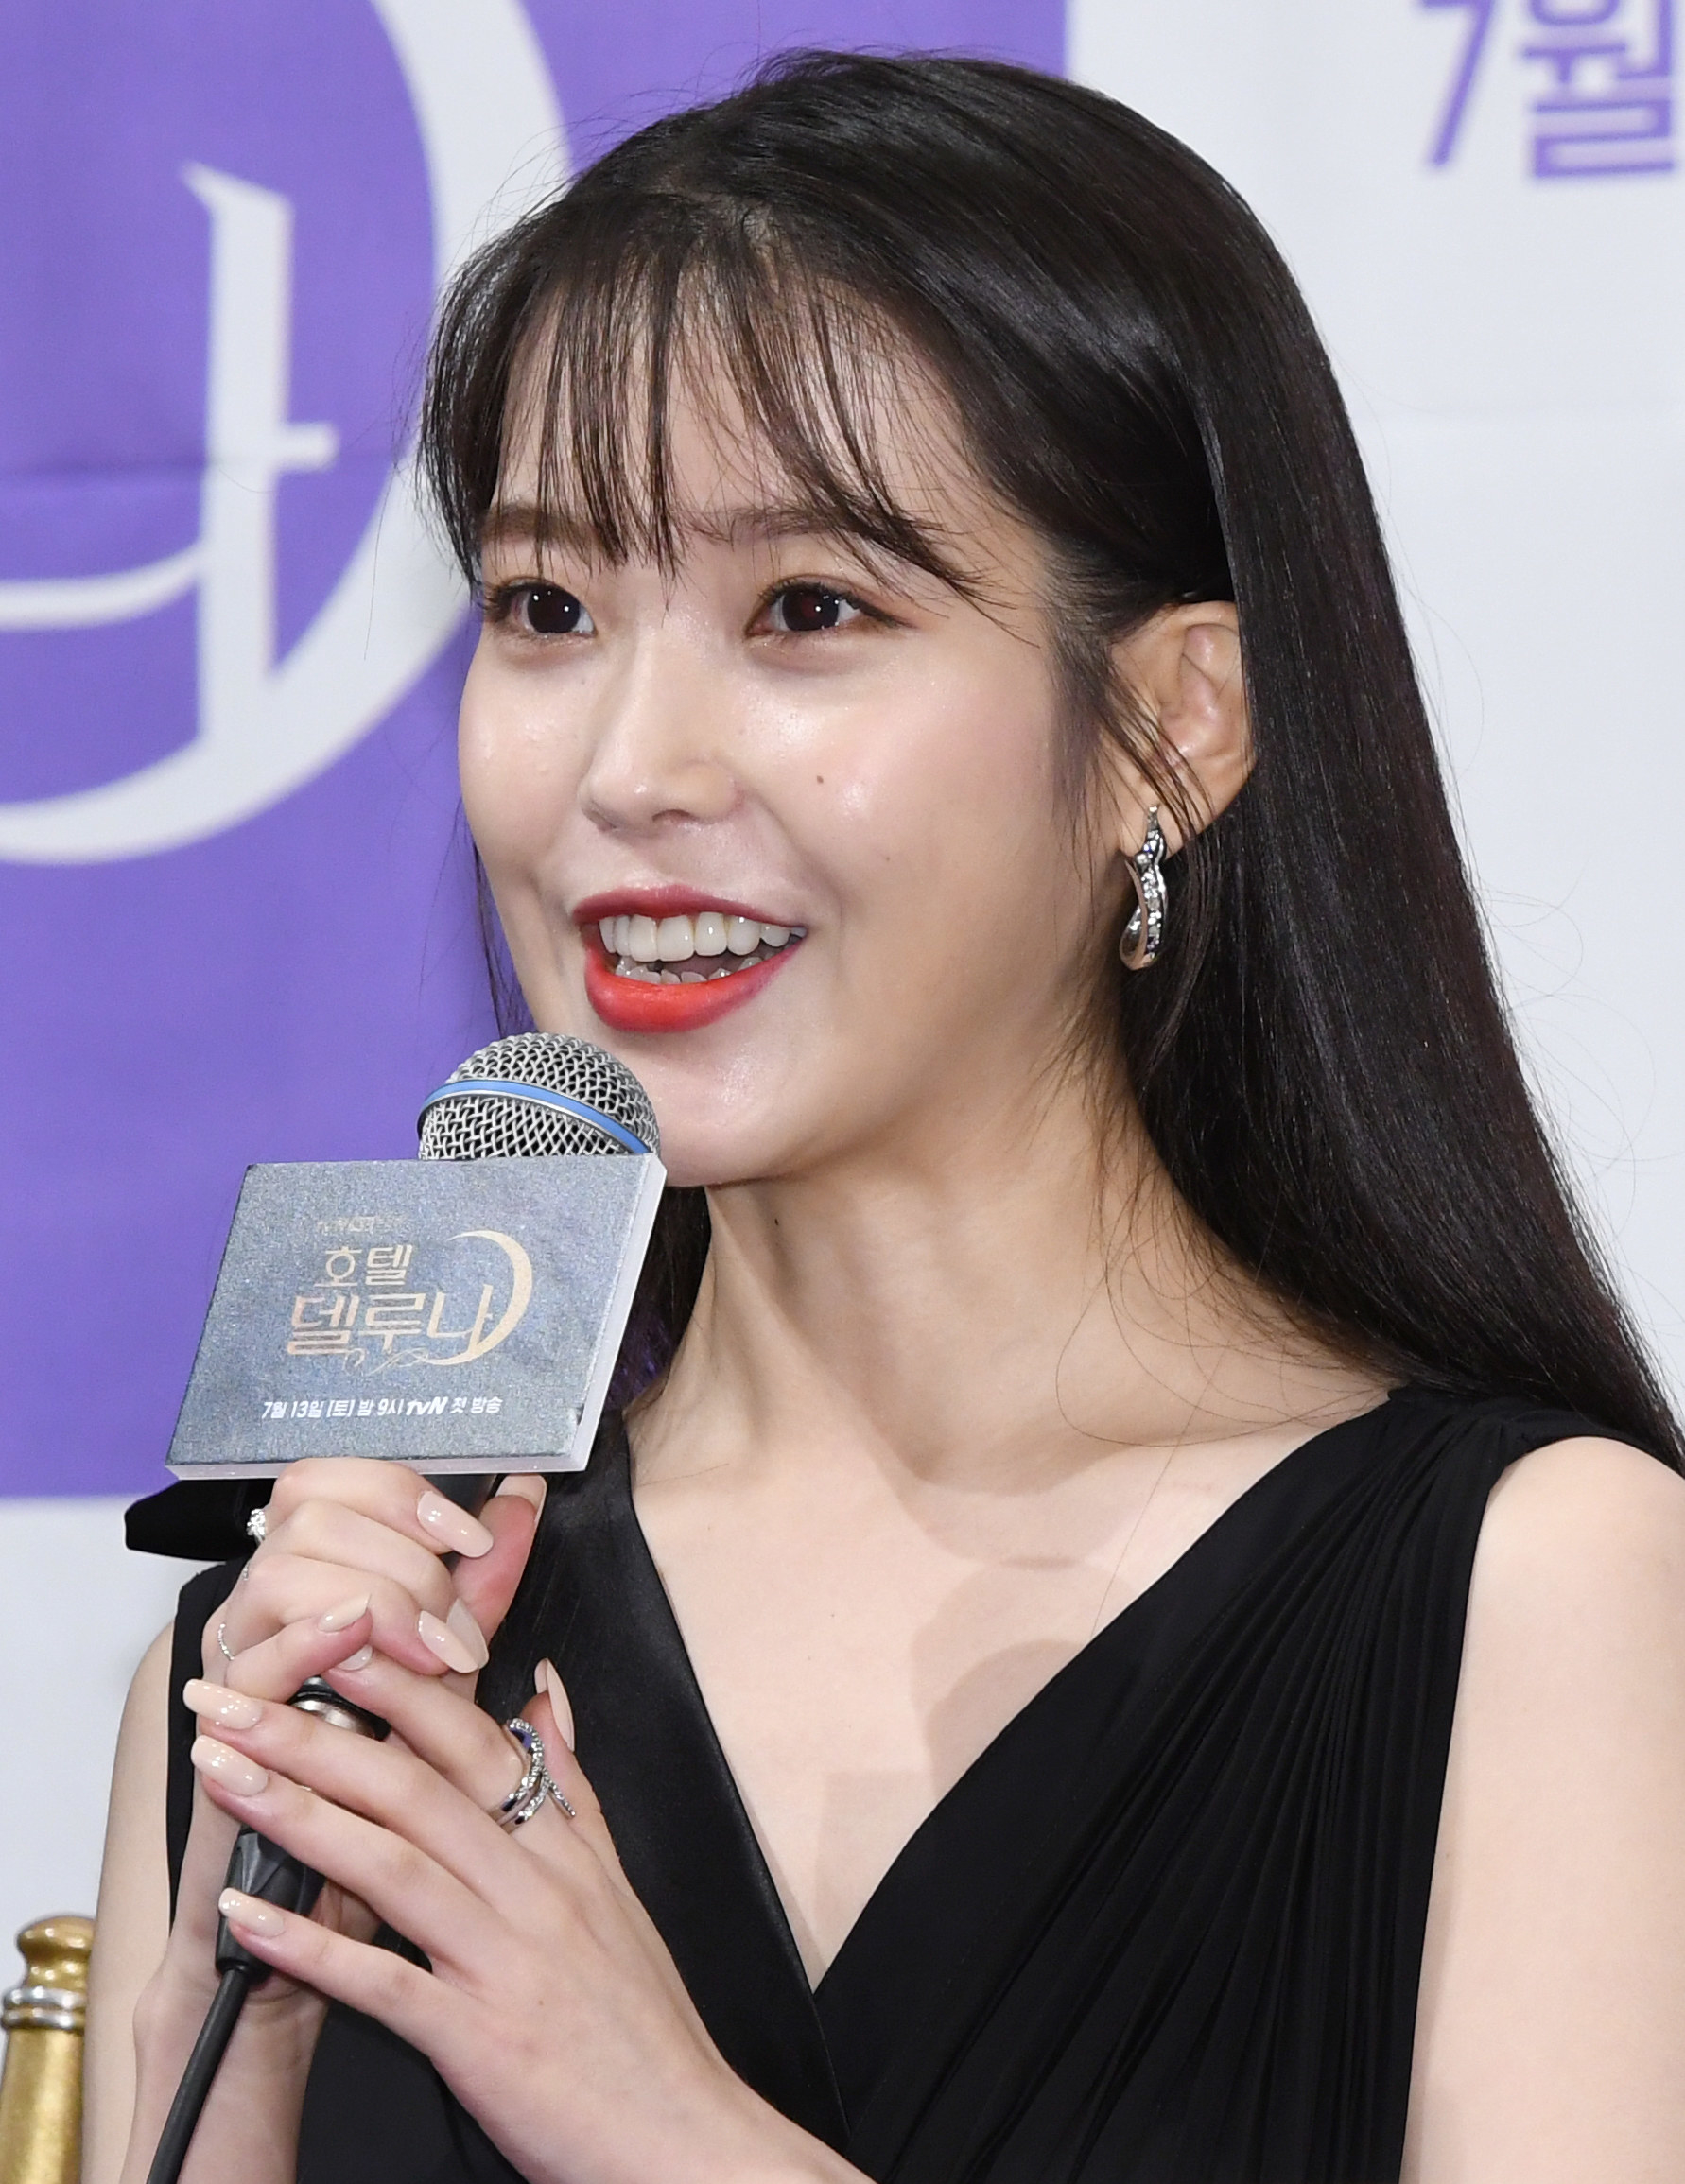 IU speaking at an event